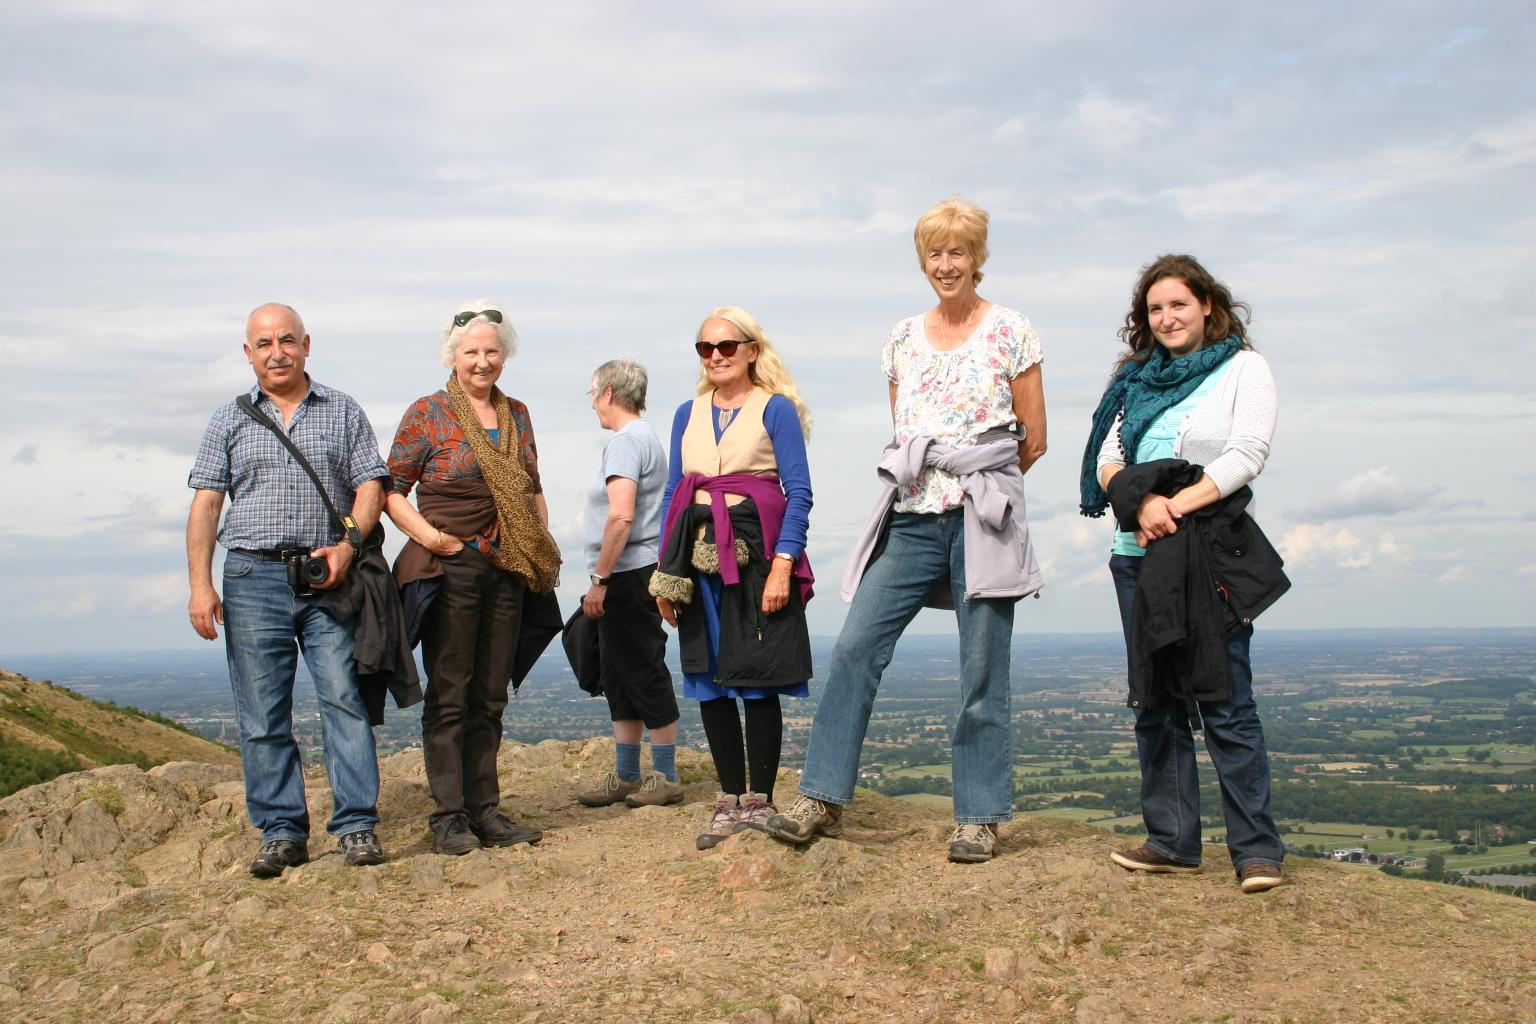 Sunday 24th August, afternoon on the Malvern Hills.